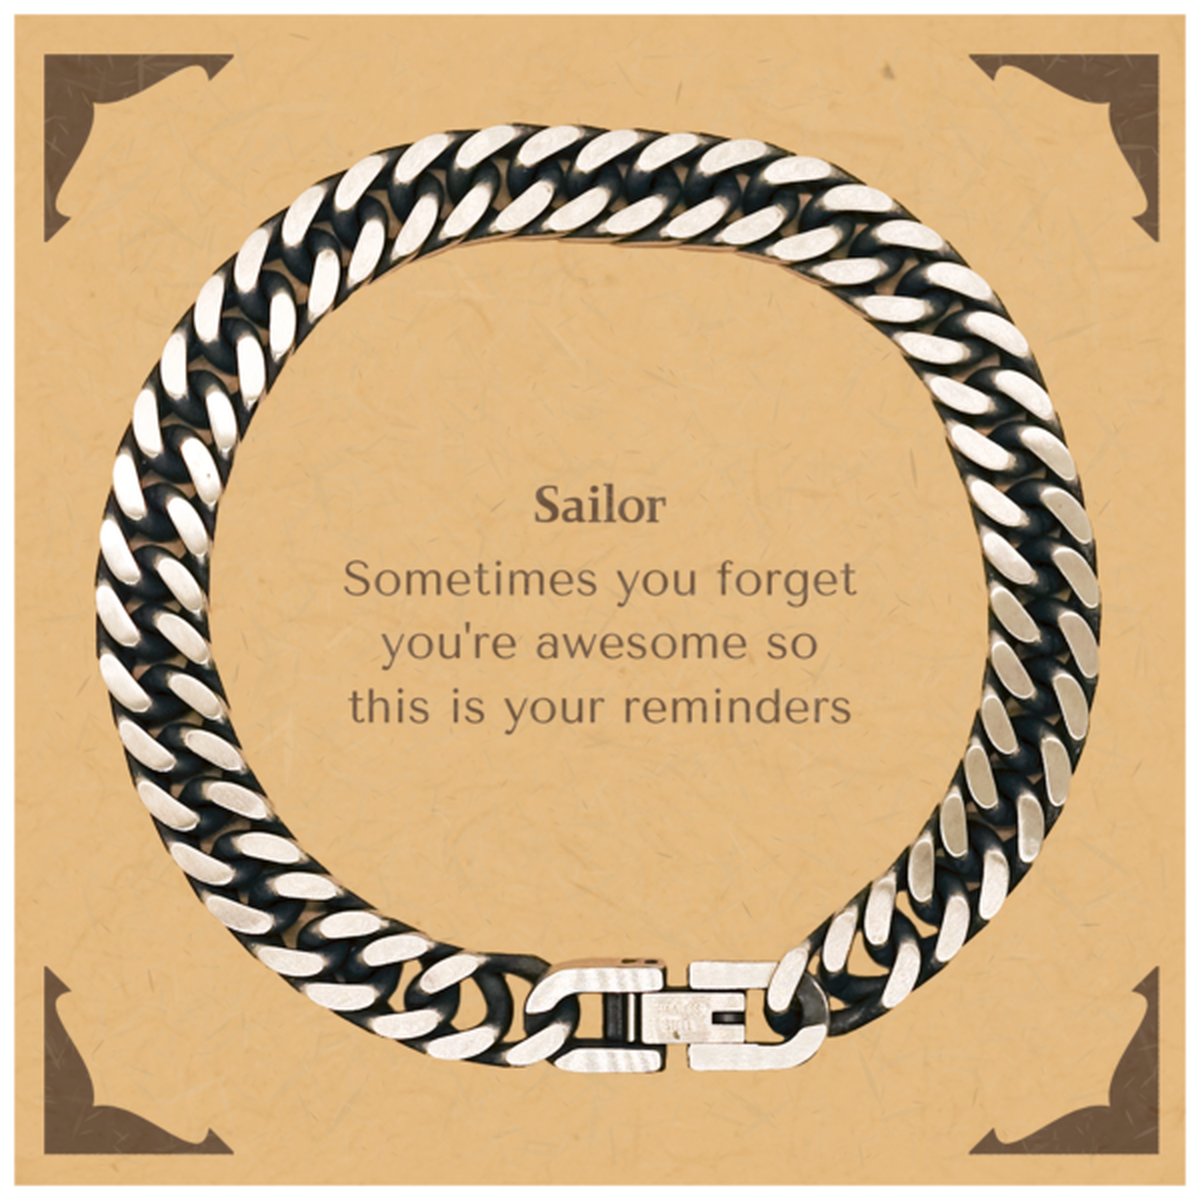 Sentimental Sailor Cuban Link Chain Bracelet, Sailor Sometimes you forget you're awesome so this is your reminders, Graduation Christmas Birthday Gifts for Sailor, Men, Women, Coworkers